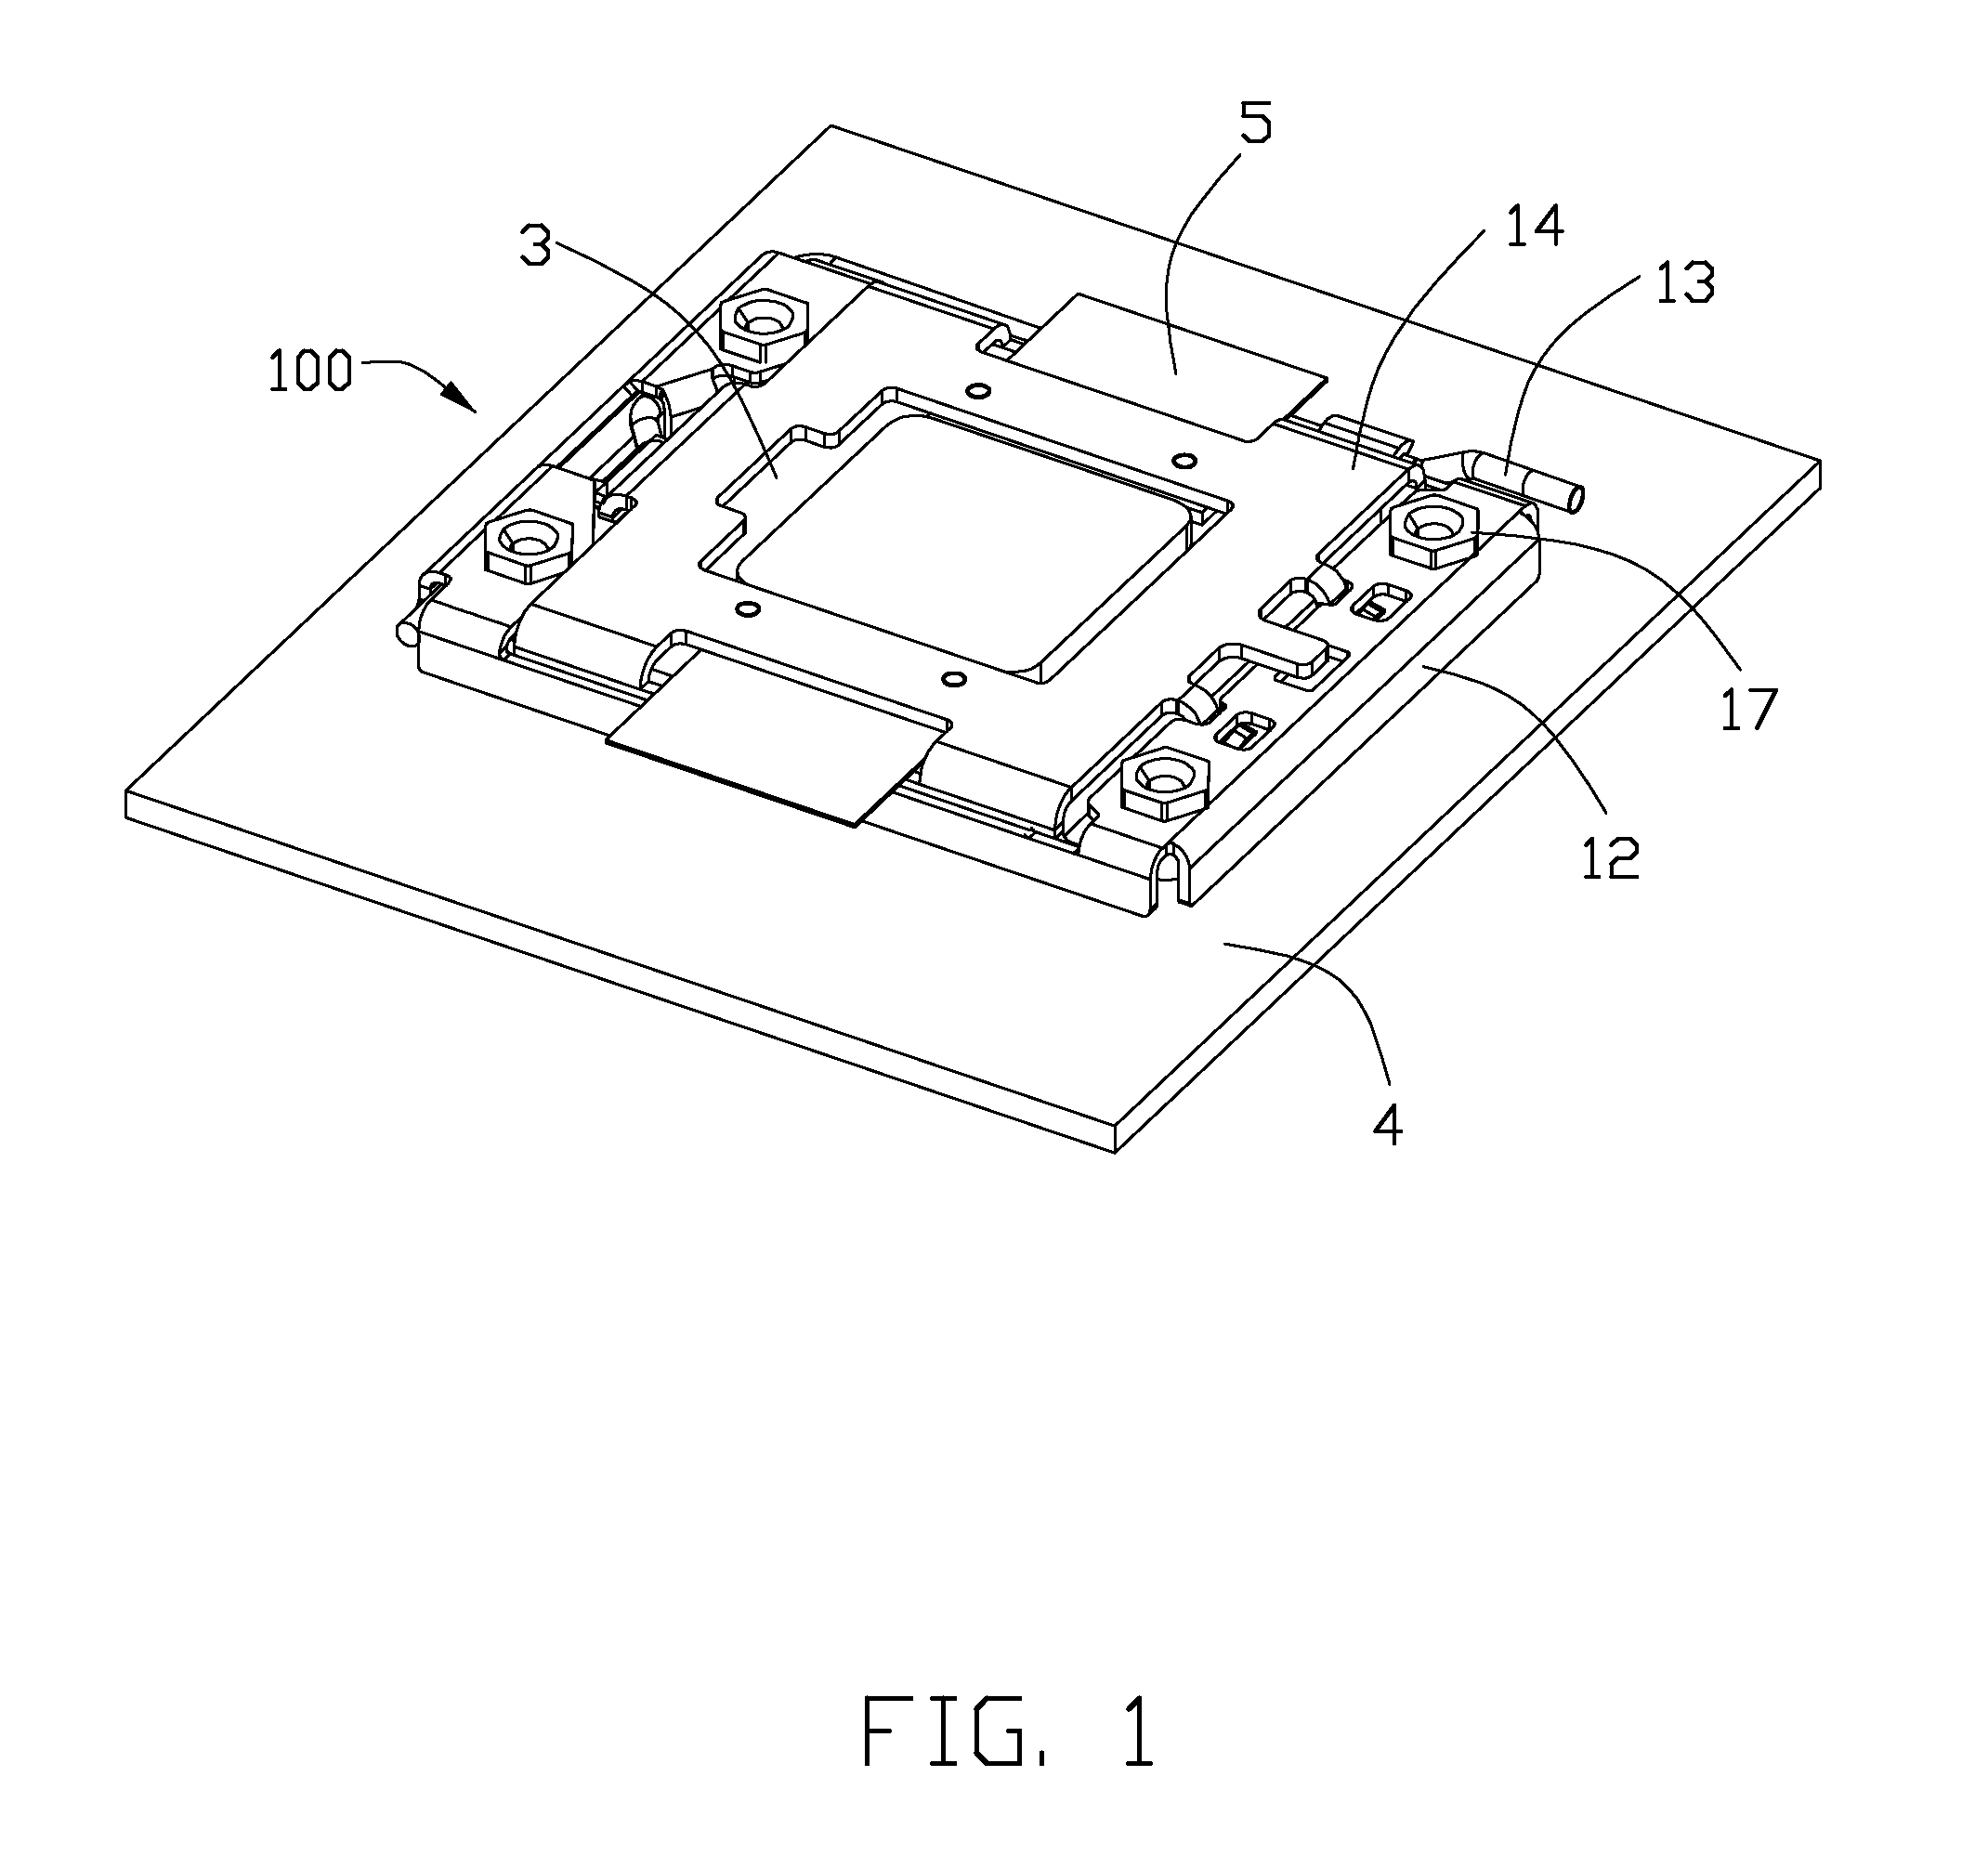 Independent loading mechanism facilitating interconnections for both CPU and flexible printed cable